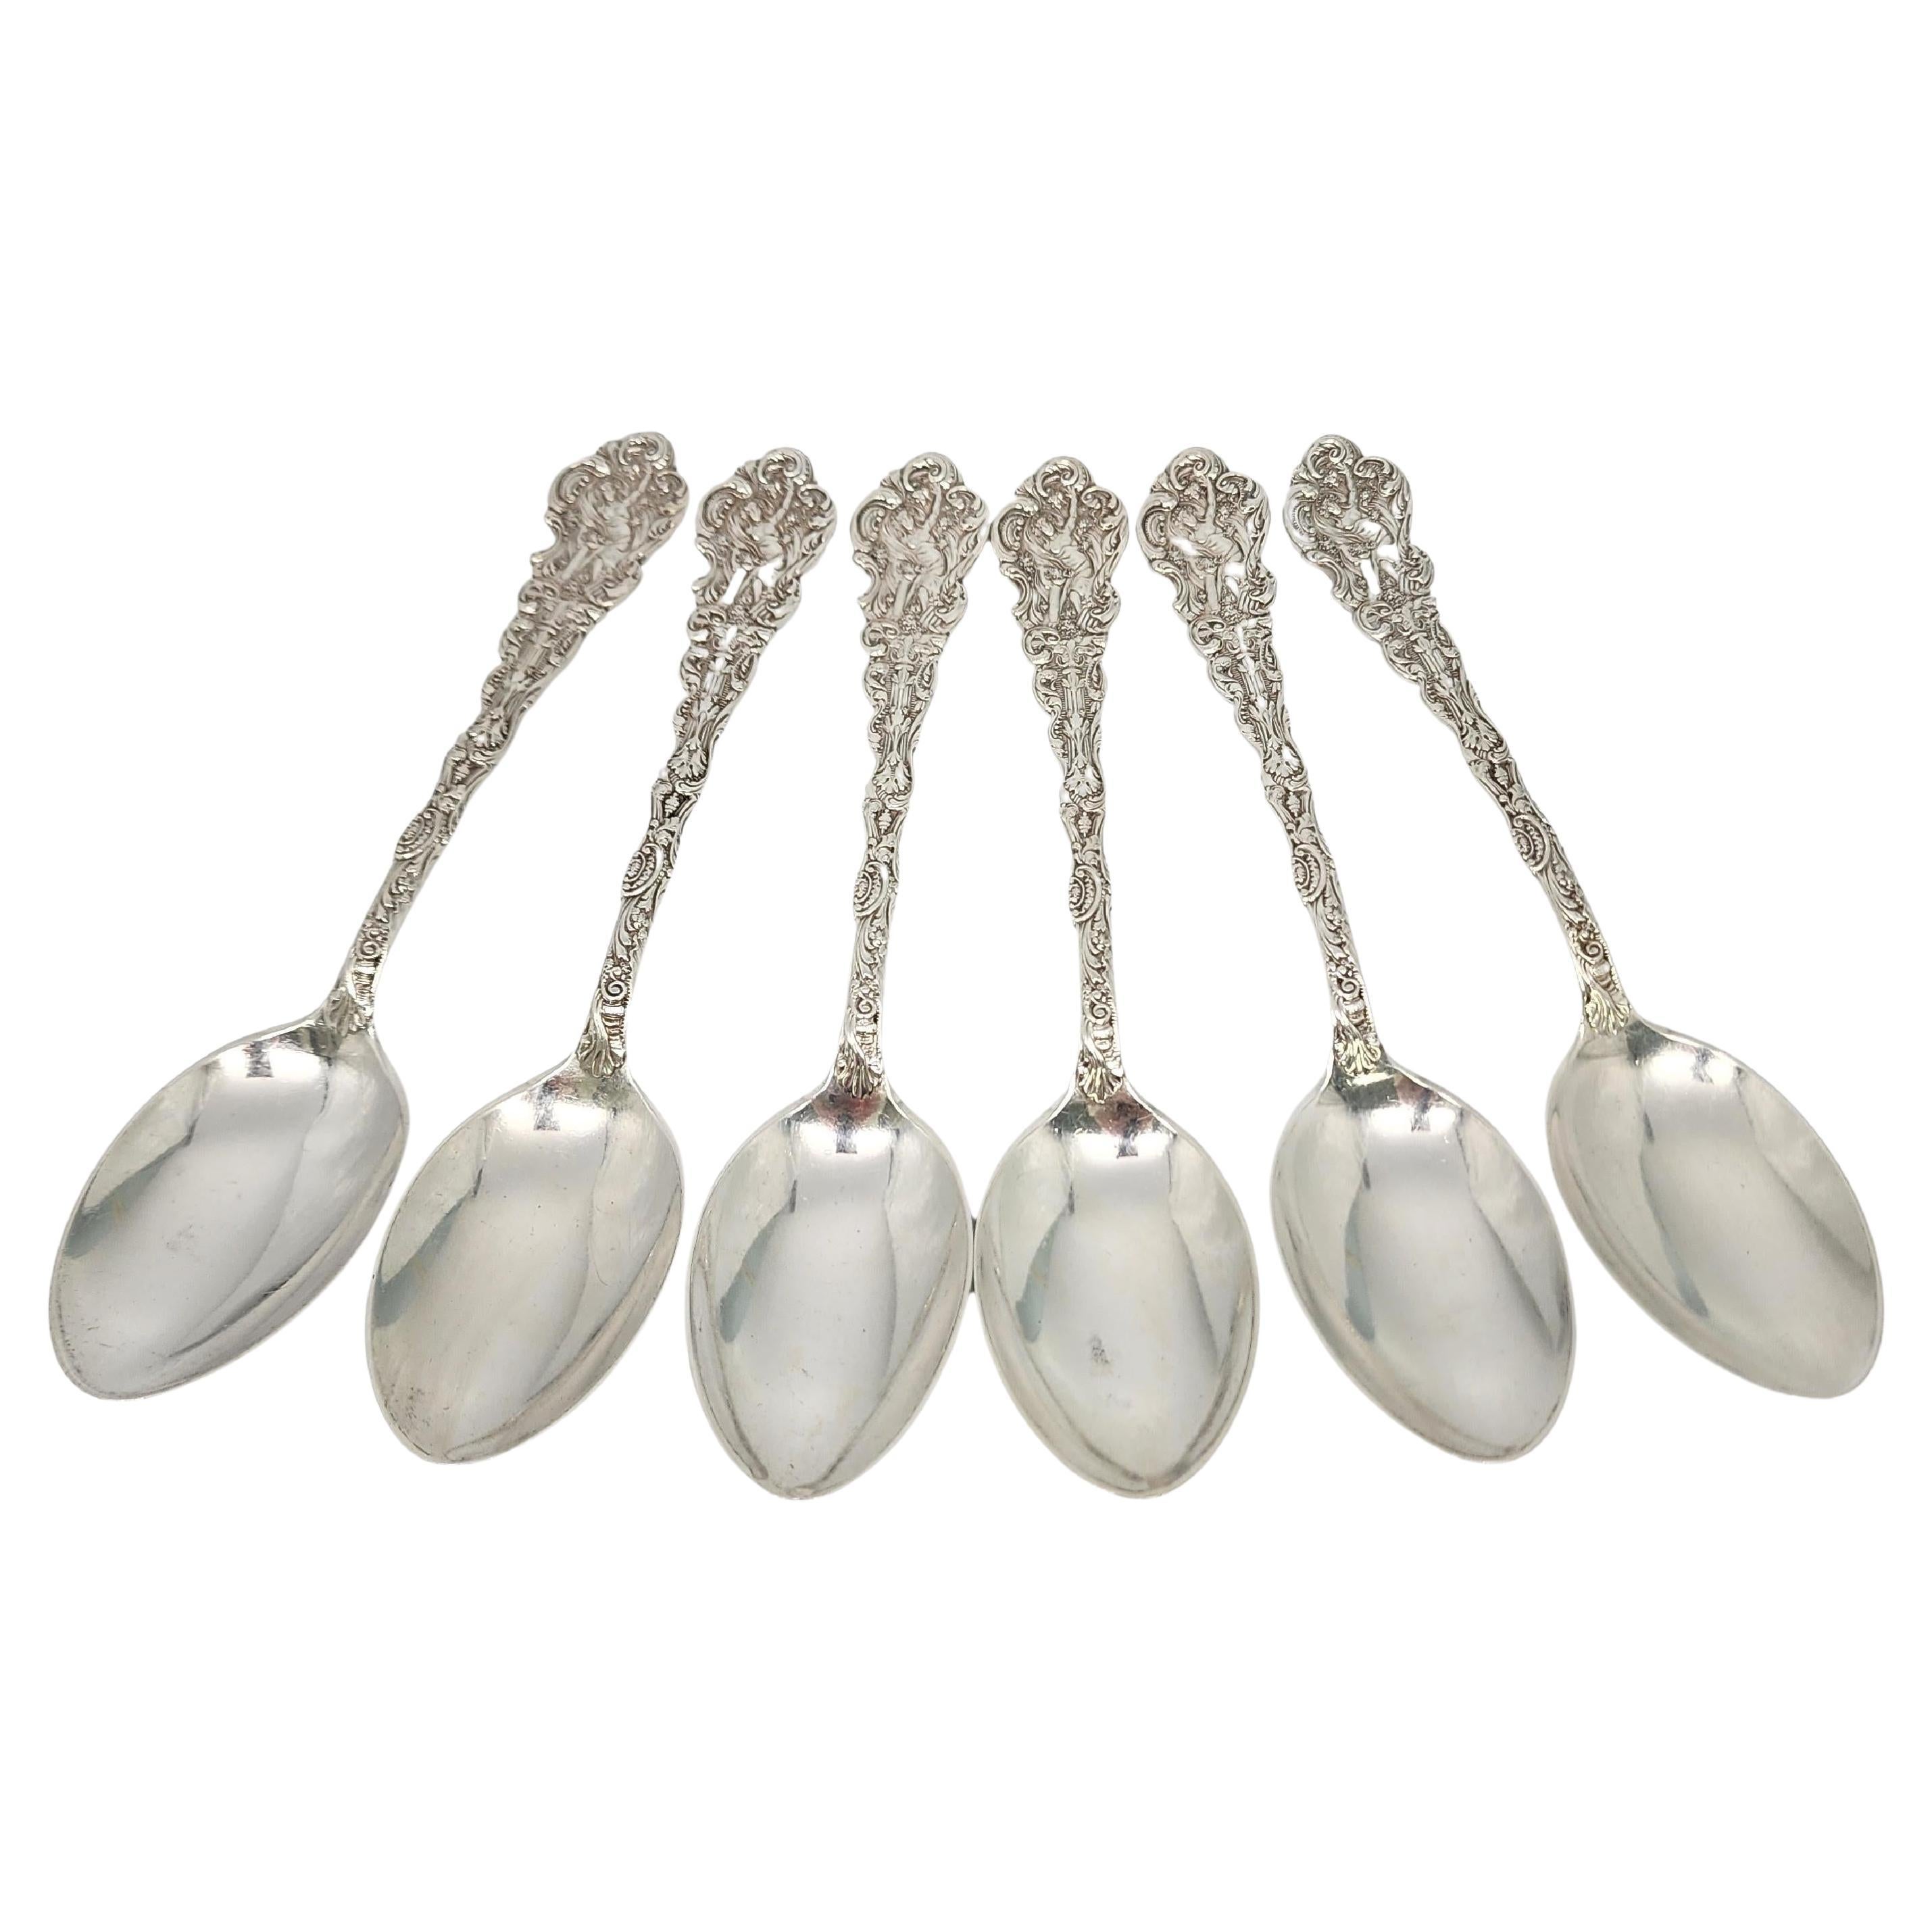 6 Gorham Versailles Sterling Silver Dessert Oval Soup Spoons 7 1/8" Mono #17141